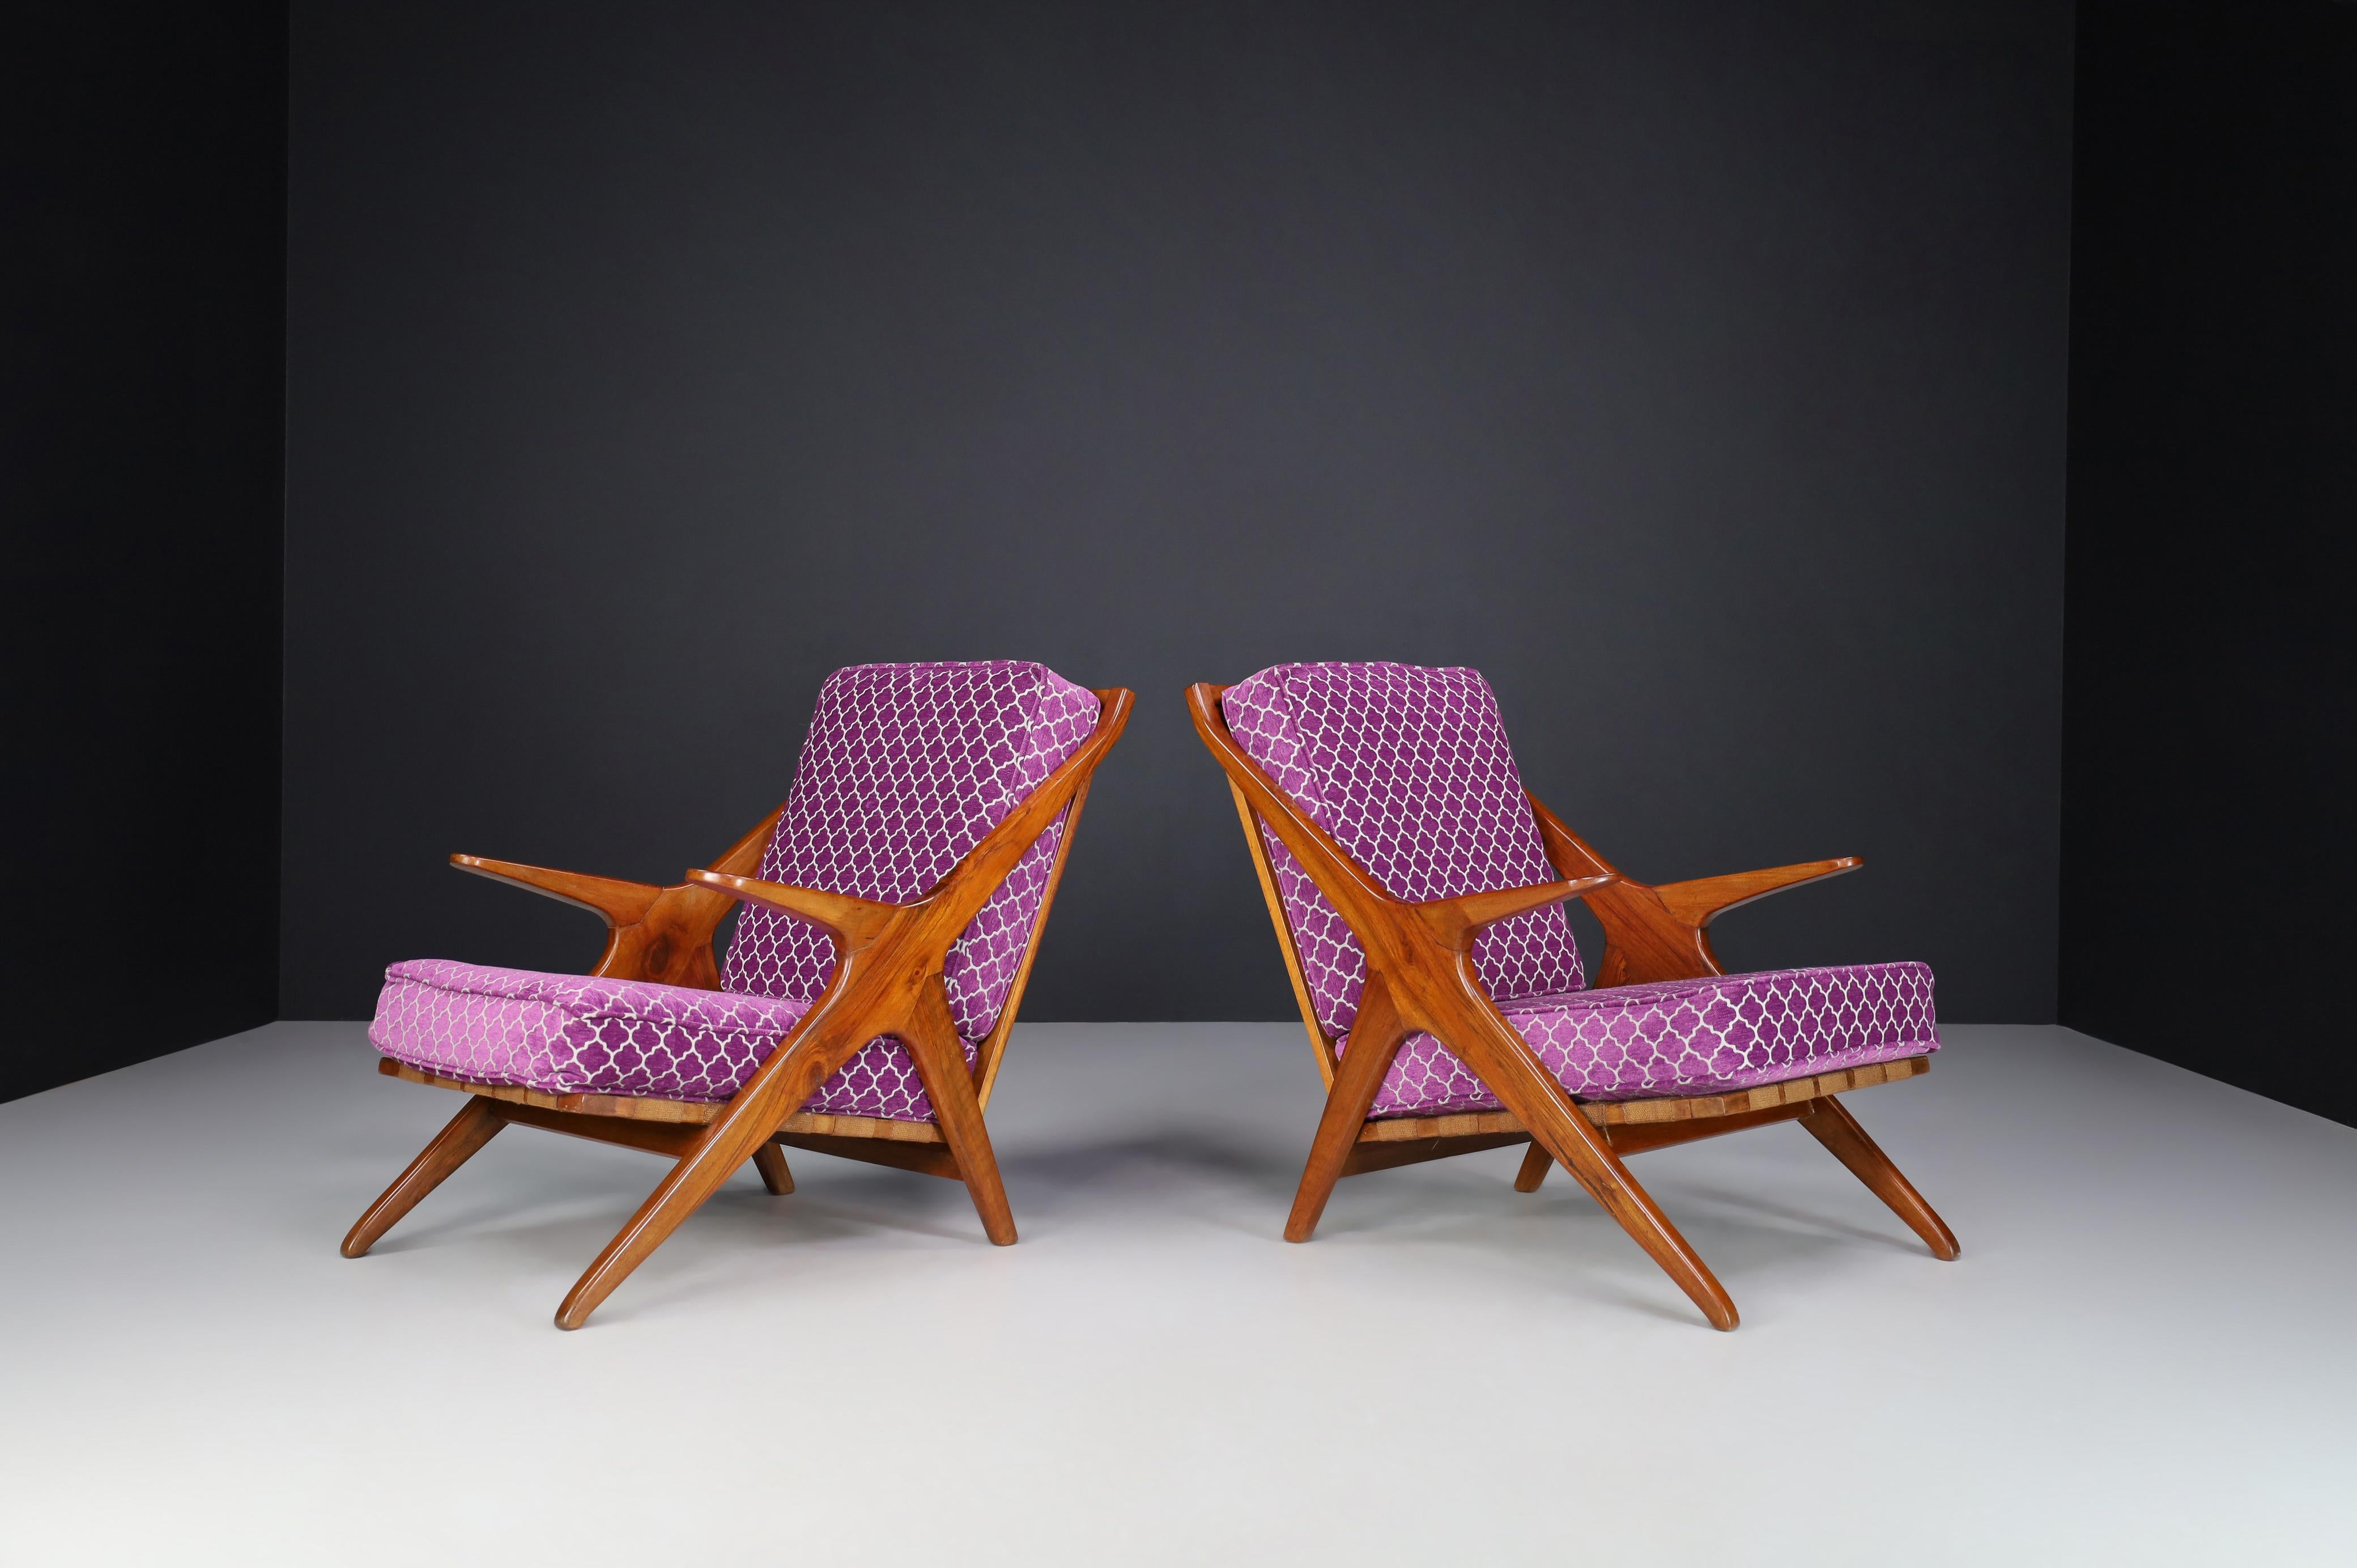 Mid-Century Elegant Armchairs in Walnut and Original Fabric, Italy 1950s

Pair of two elegant armchairs in walnut and original fabric in good vintage condition, Italy 1950s. These armchairs - lounge chairs would make an eye-catching addition to